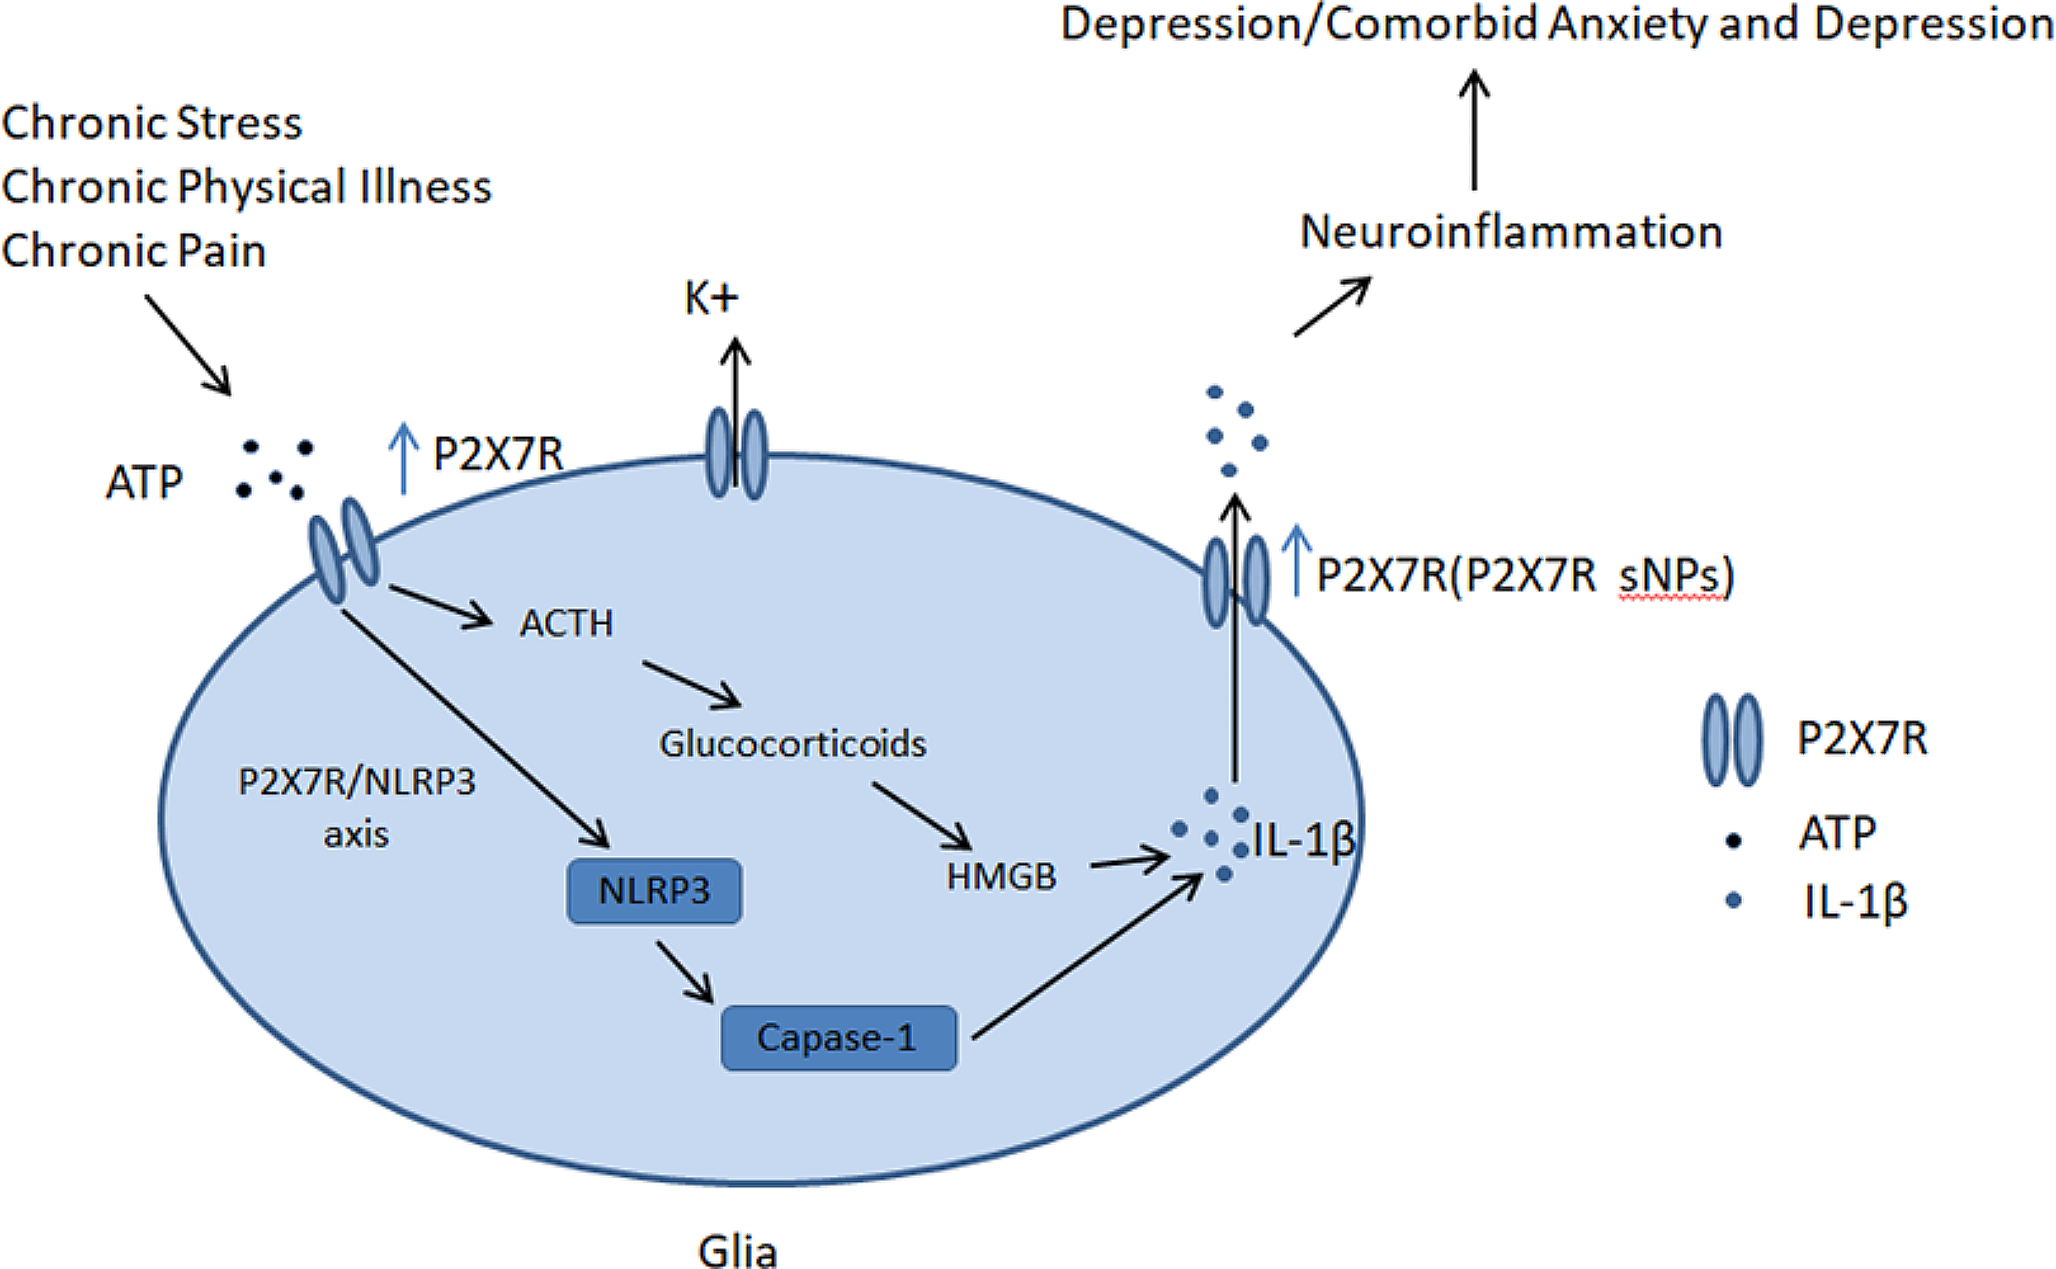 P2X7 receptor: a potential target for treating comorbid anxiety and depression